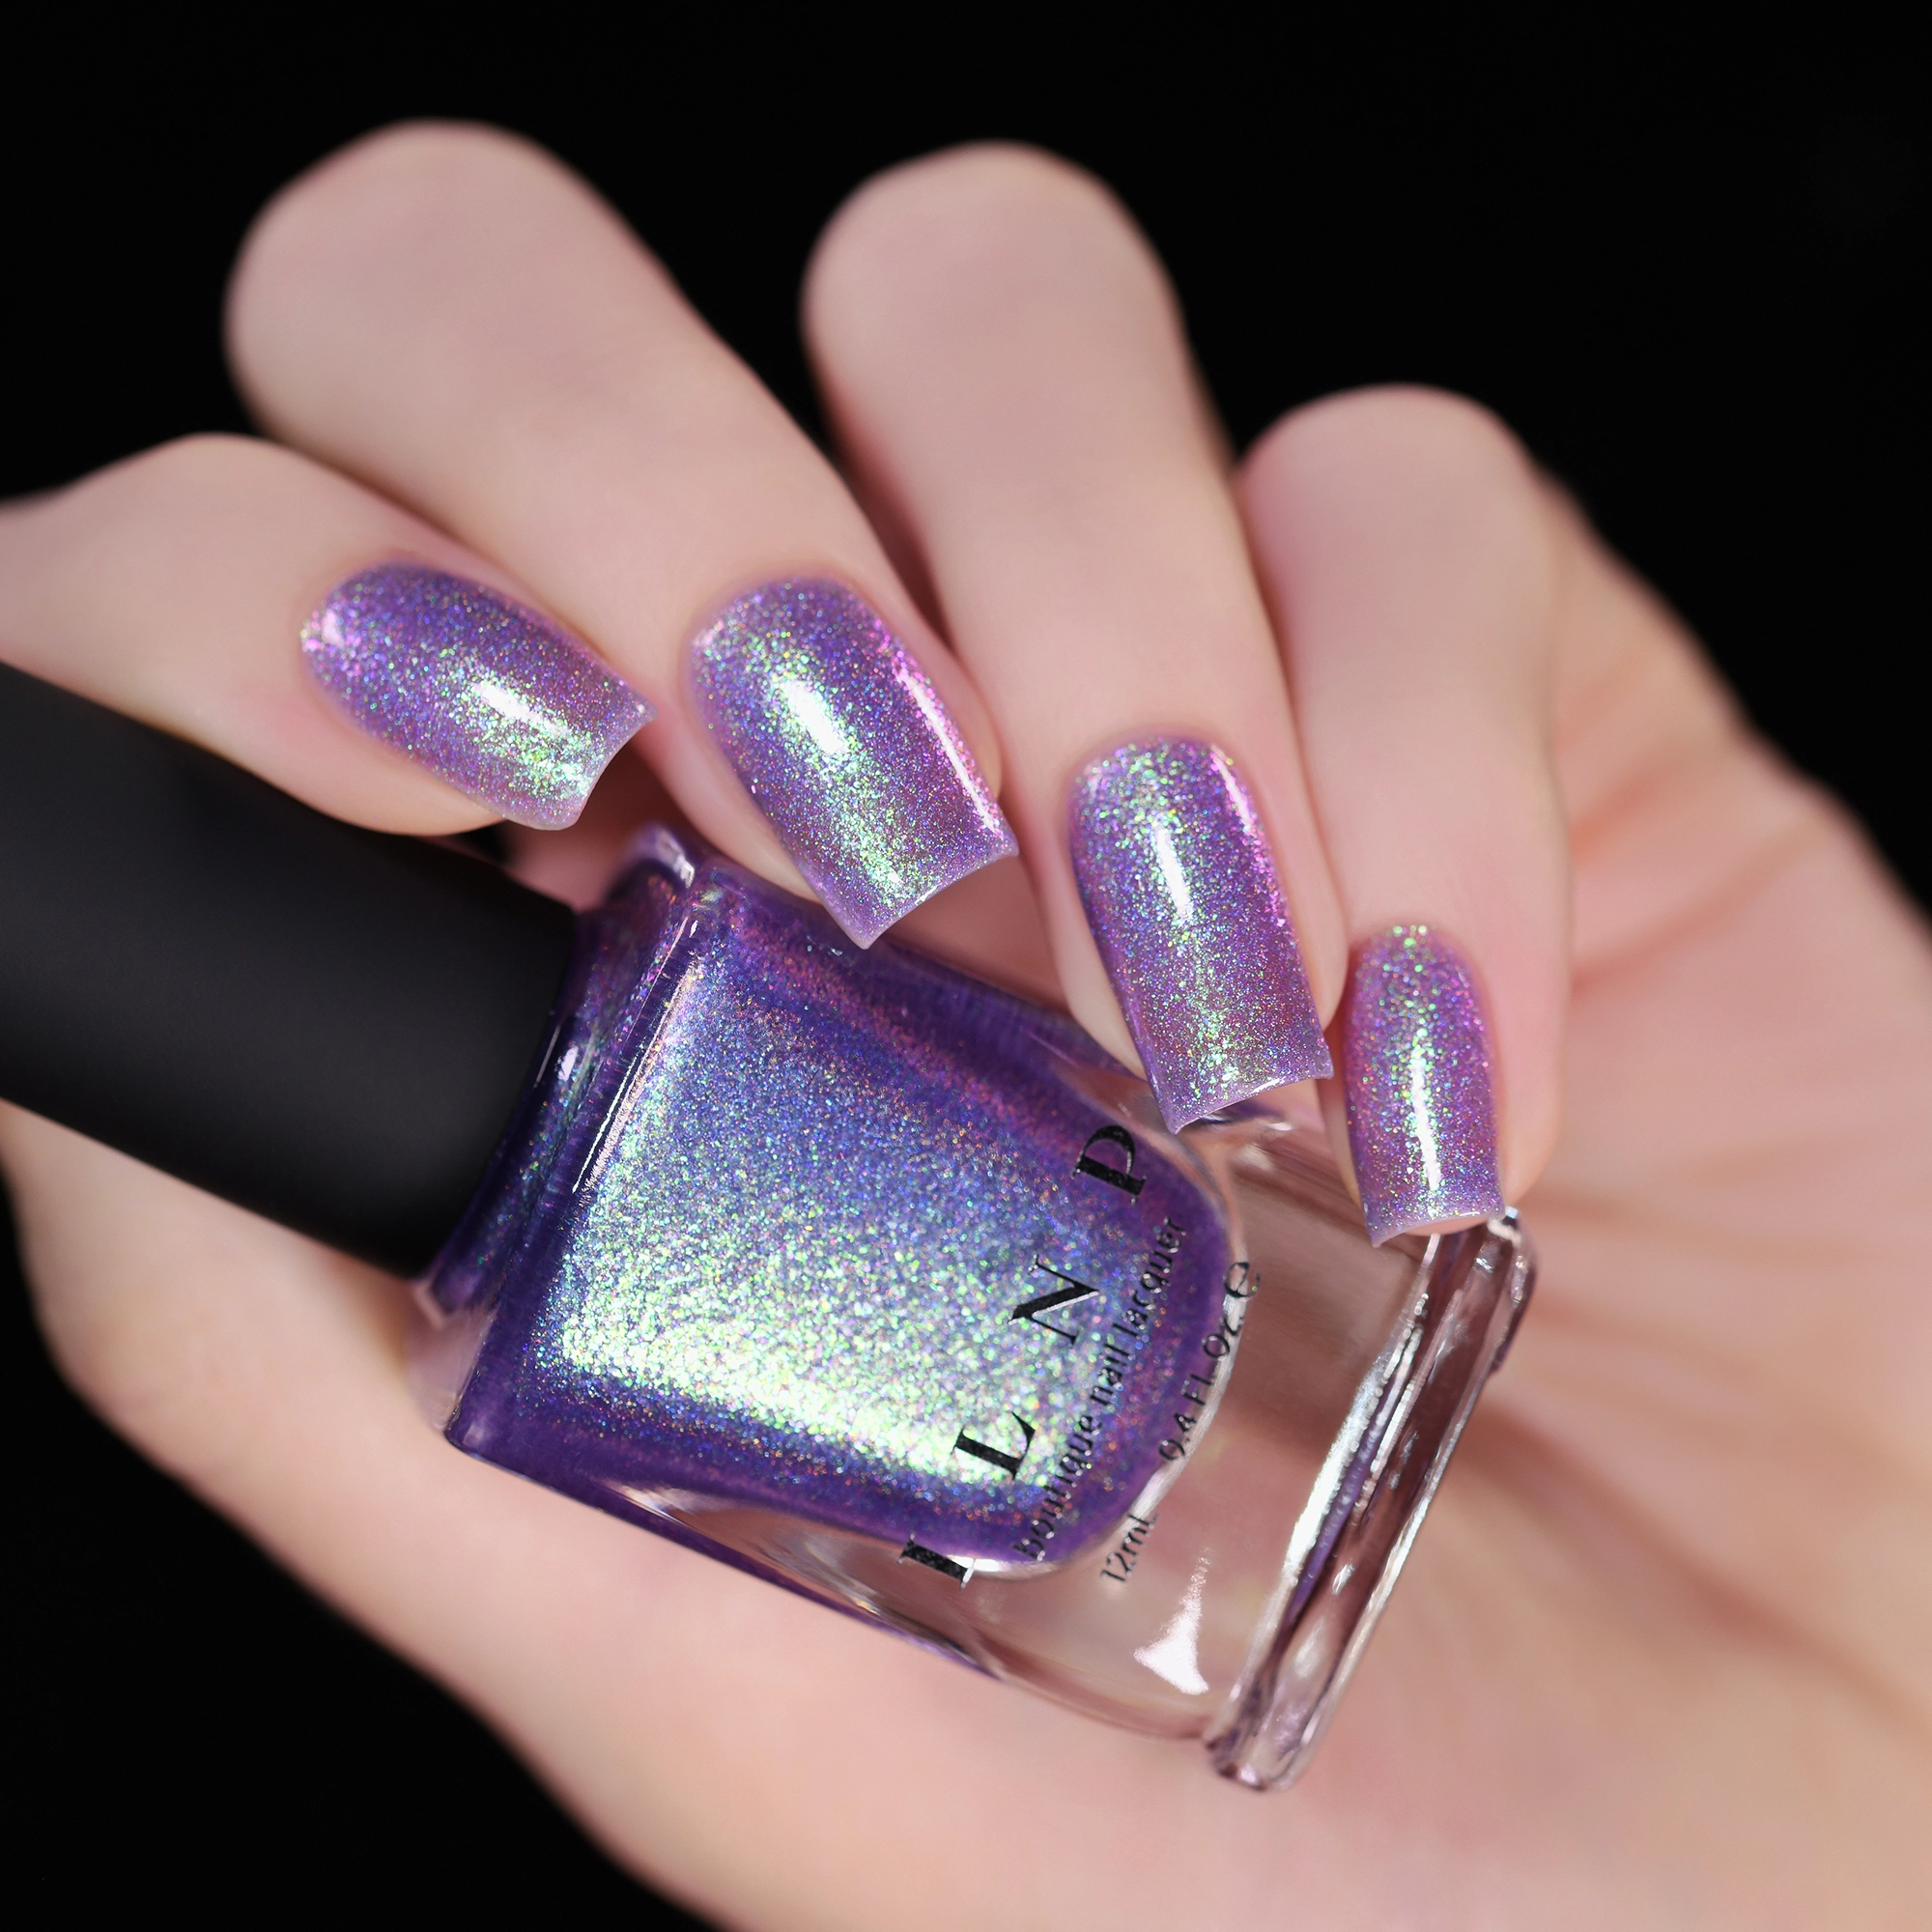 ILNP Drive-In [4]